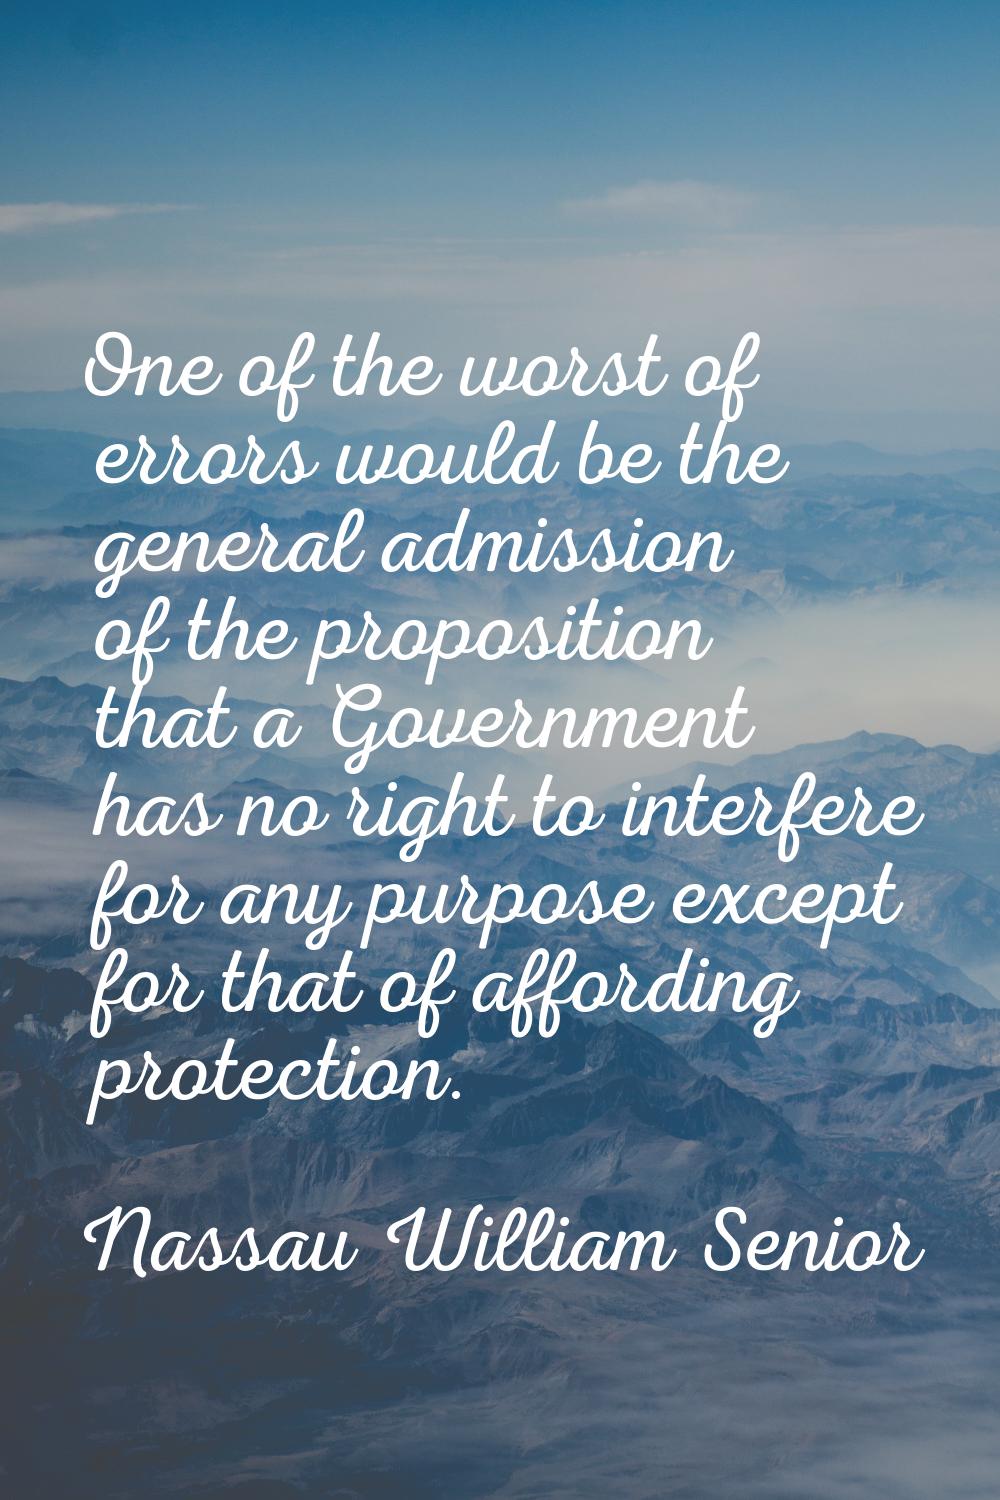 One of the worst of errors would be the general admission of the proposition that a Government has 